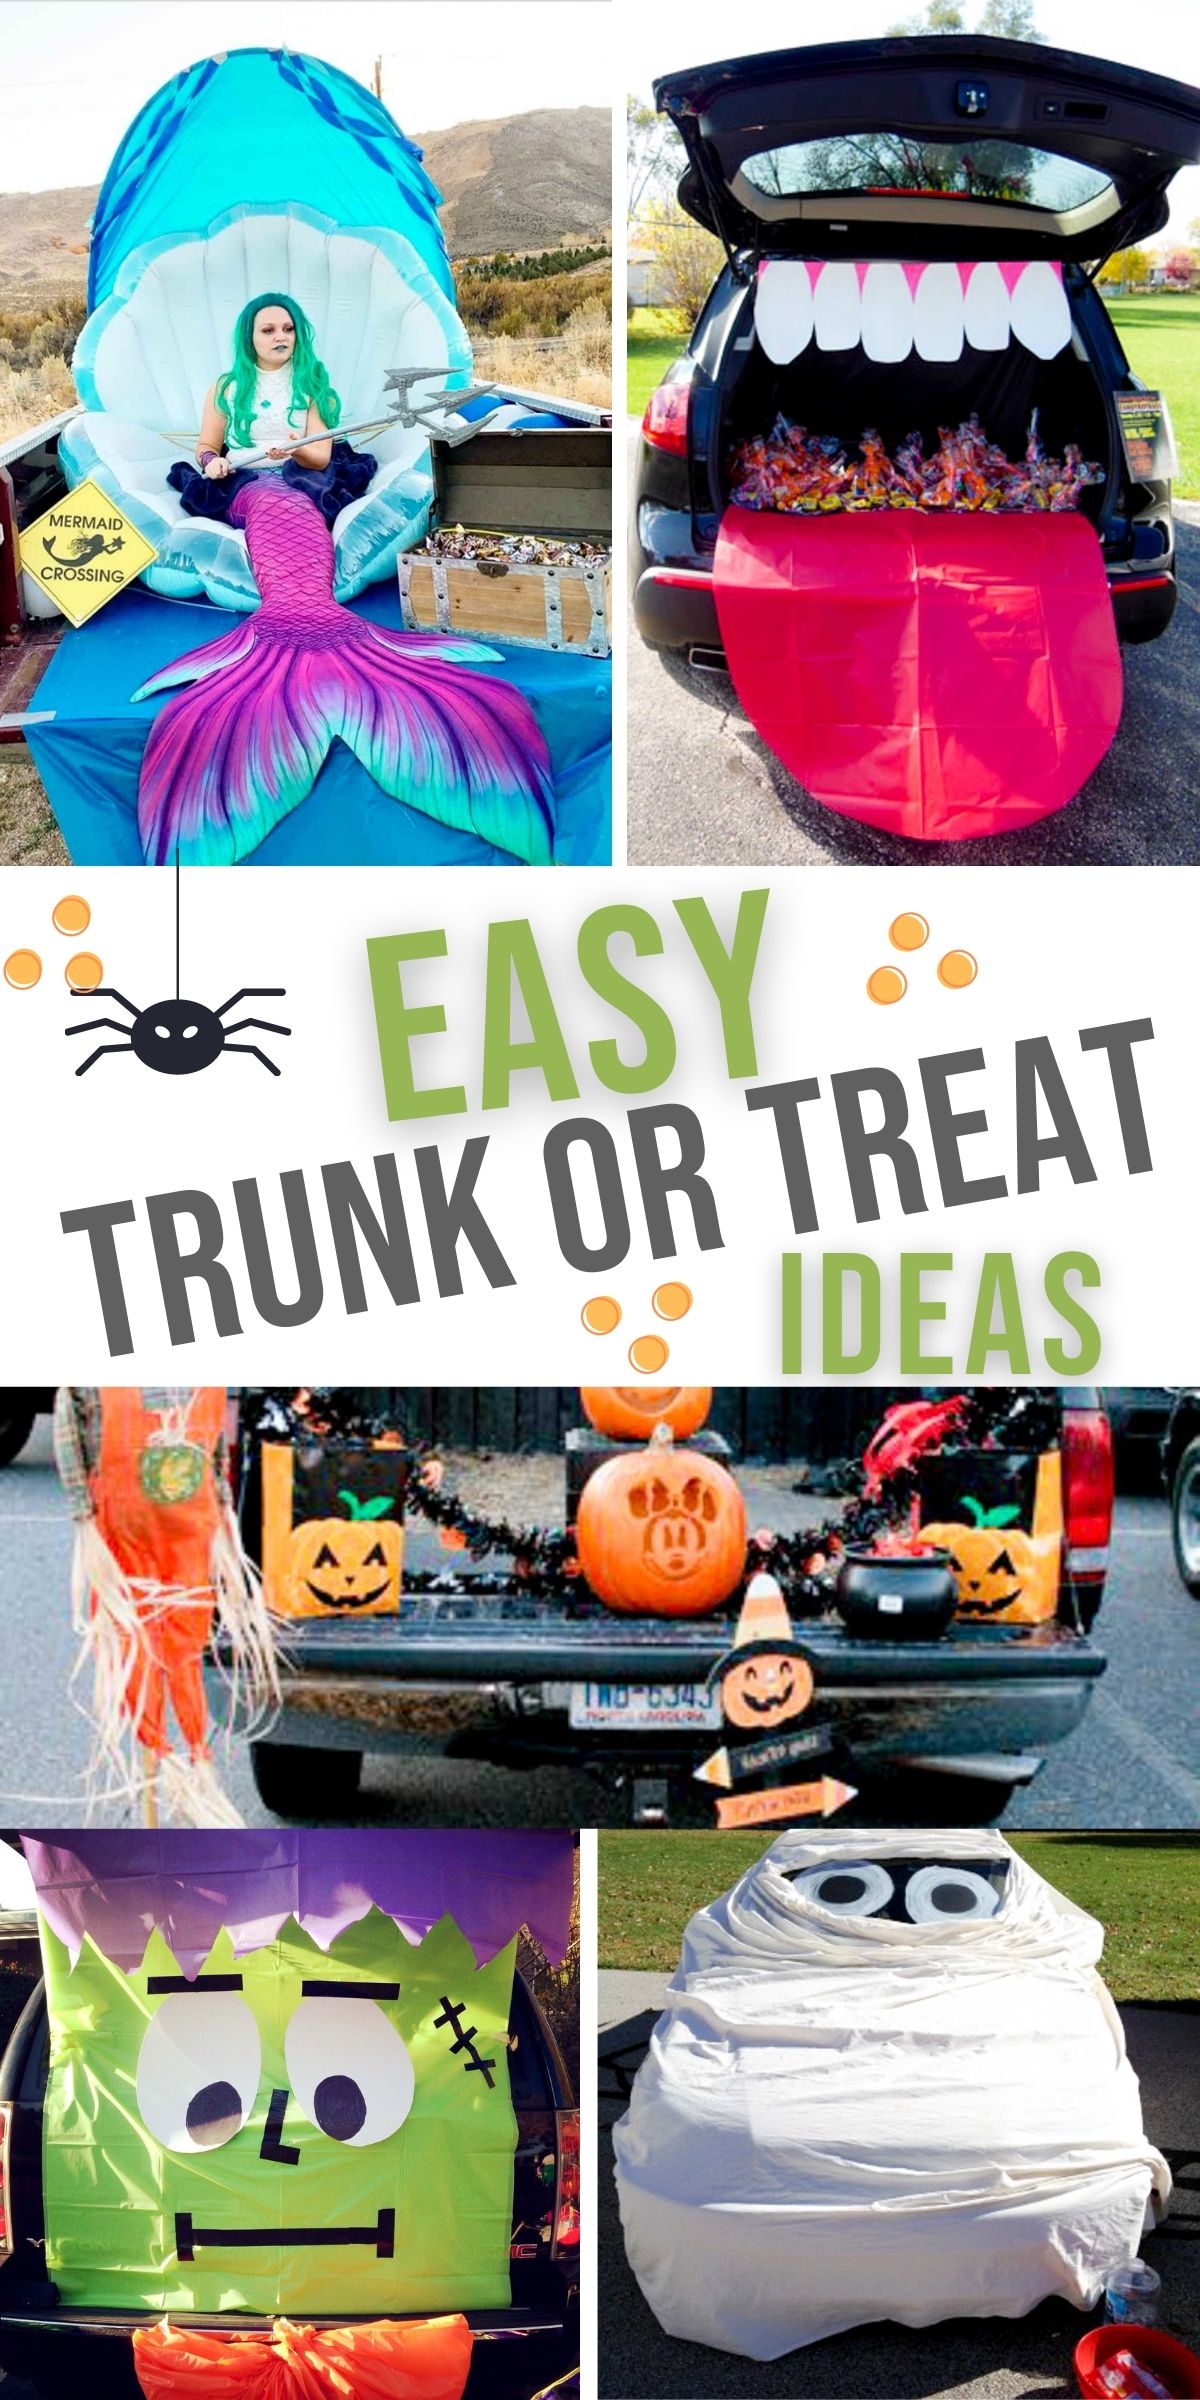 20 Thrifty Trunk or Treat Decorating Ideas - Happy Money Saver